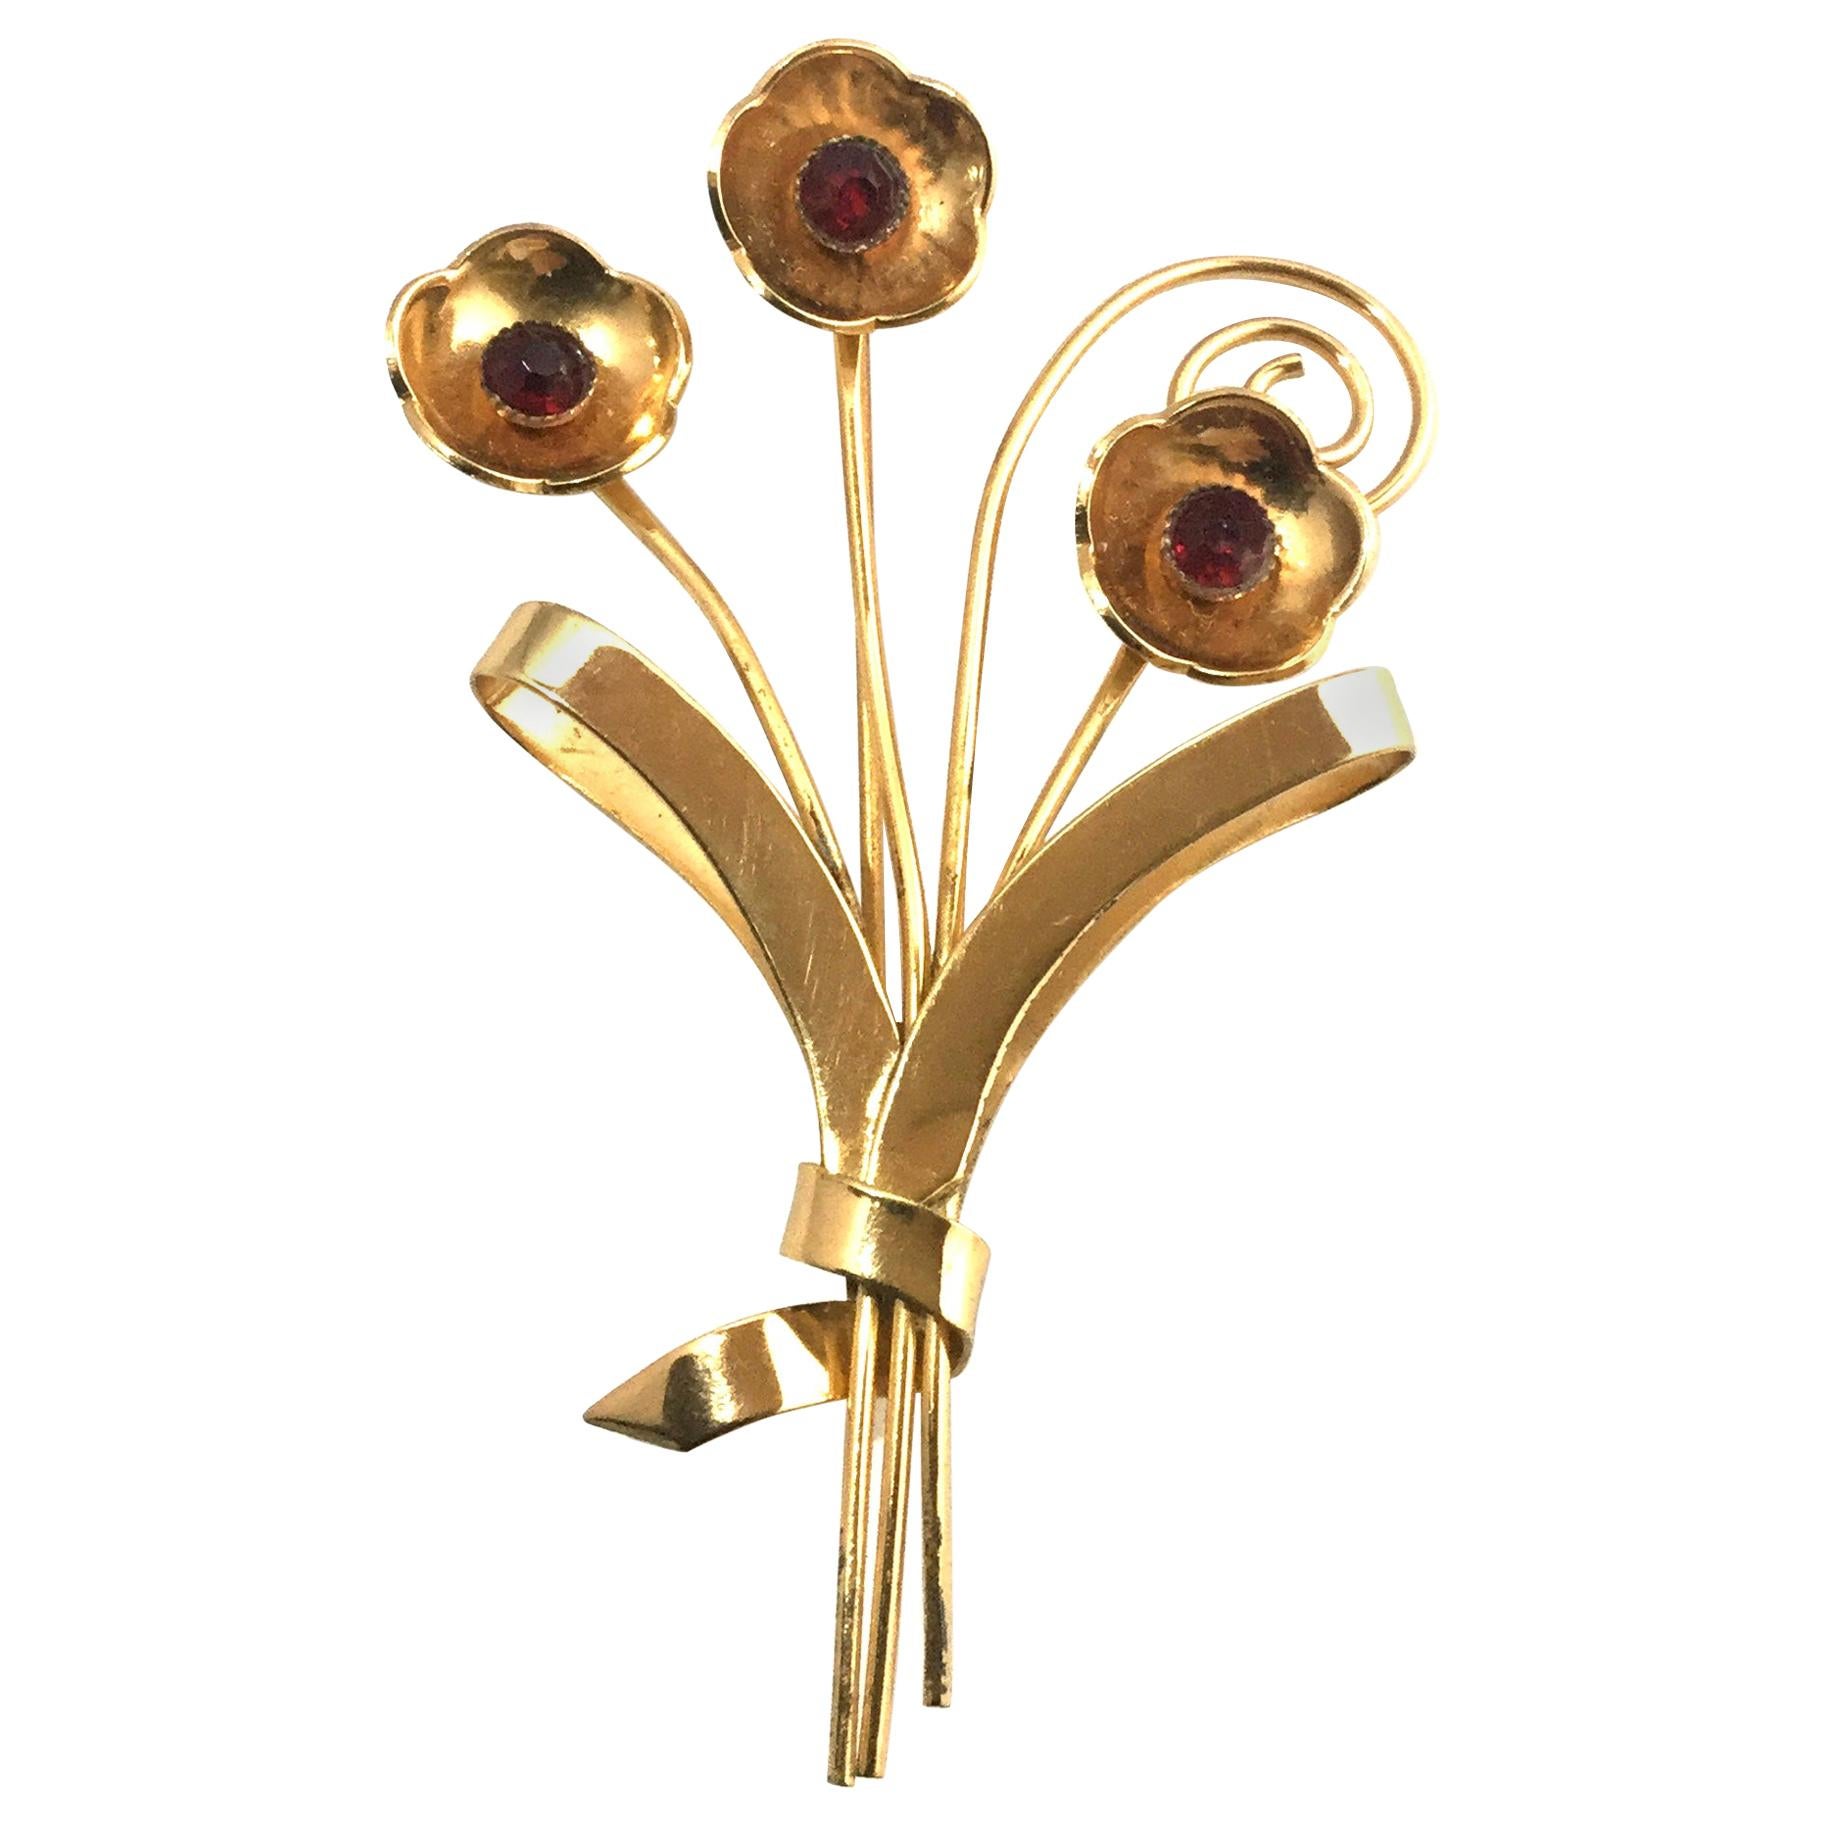 Coro Sterling Silver Gold-Plated Flower Brooch Pin